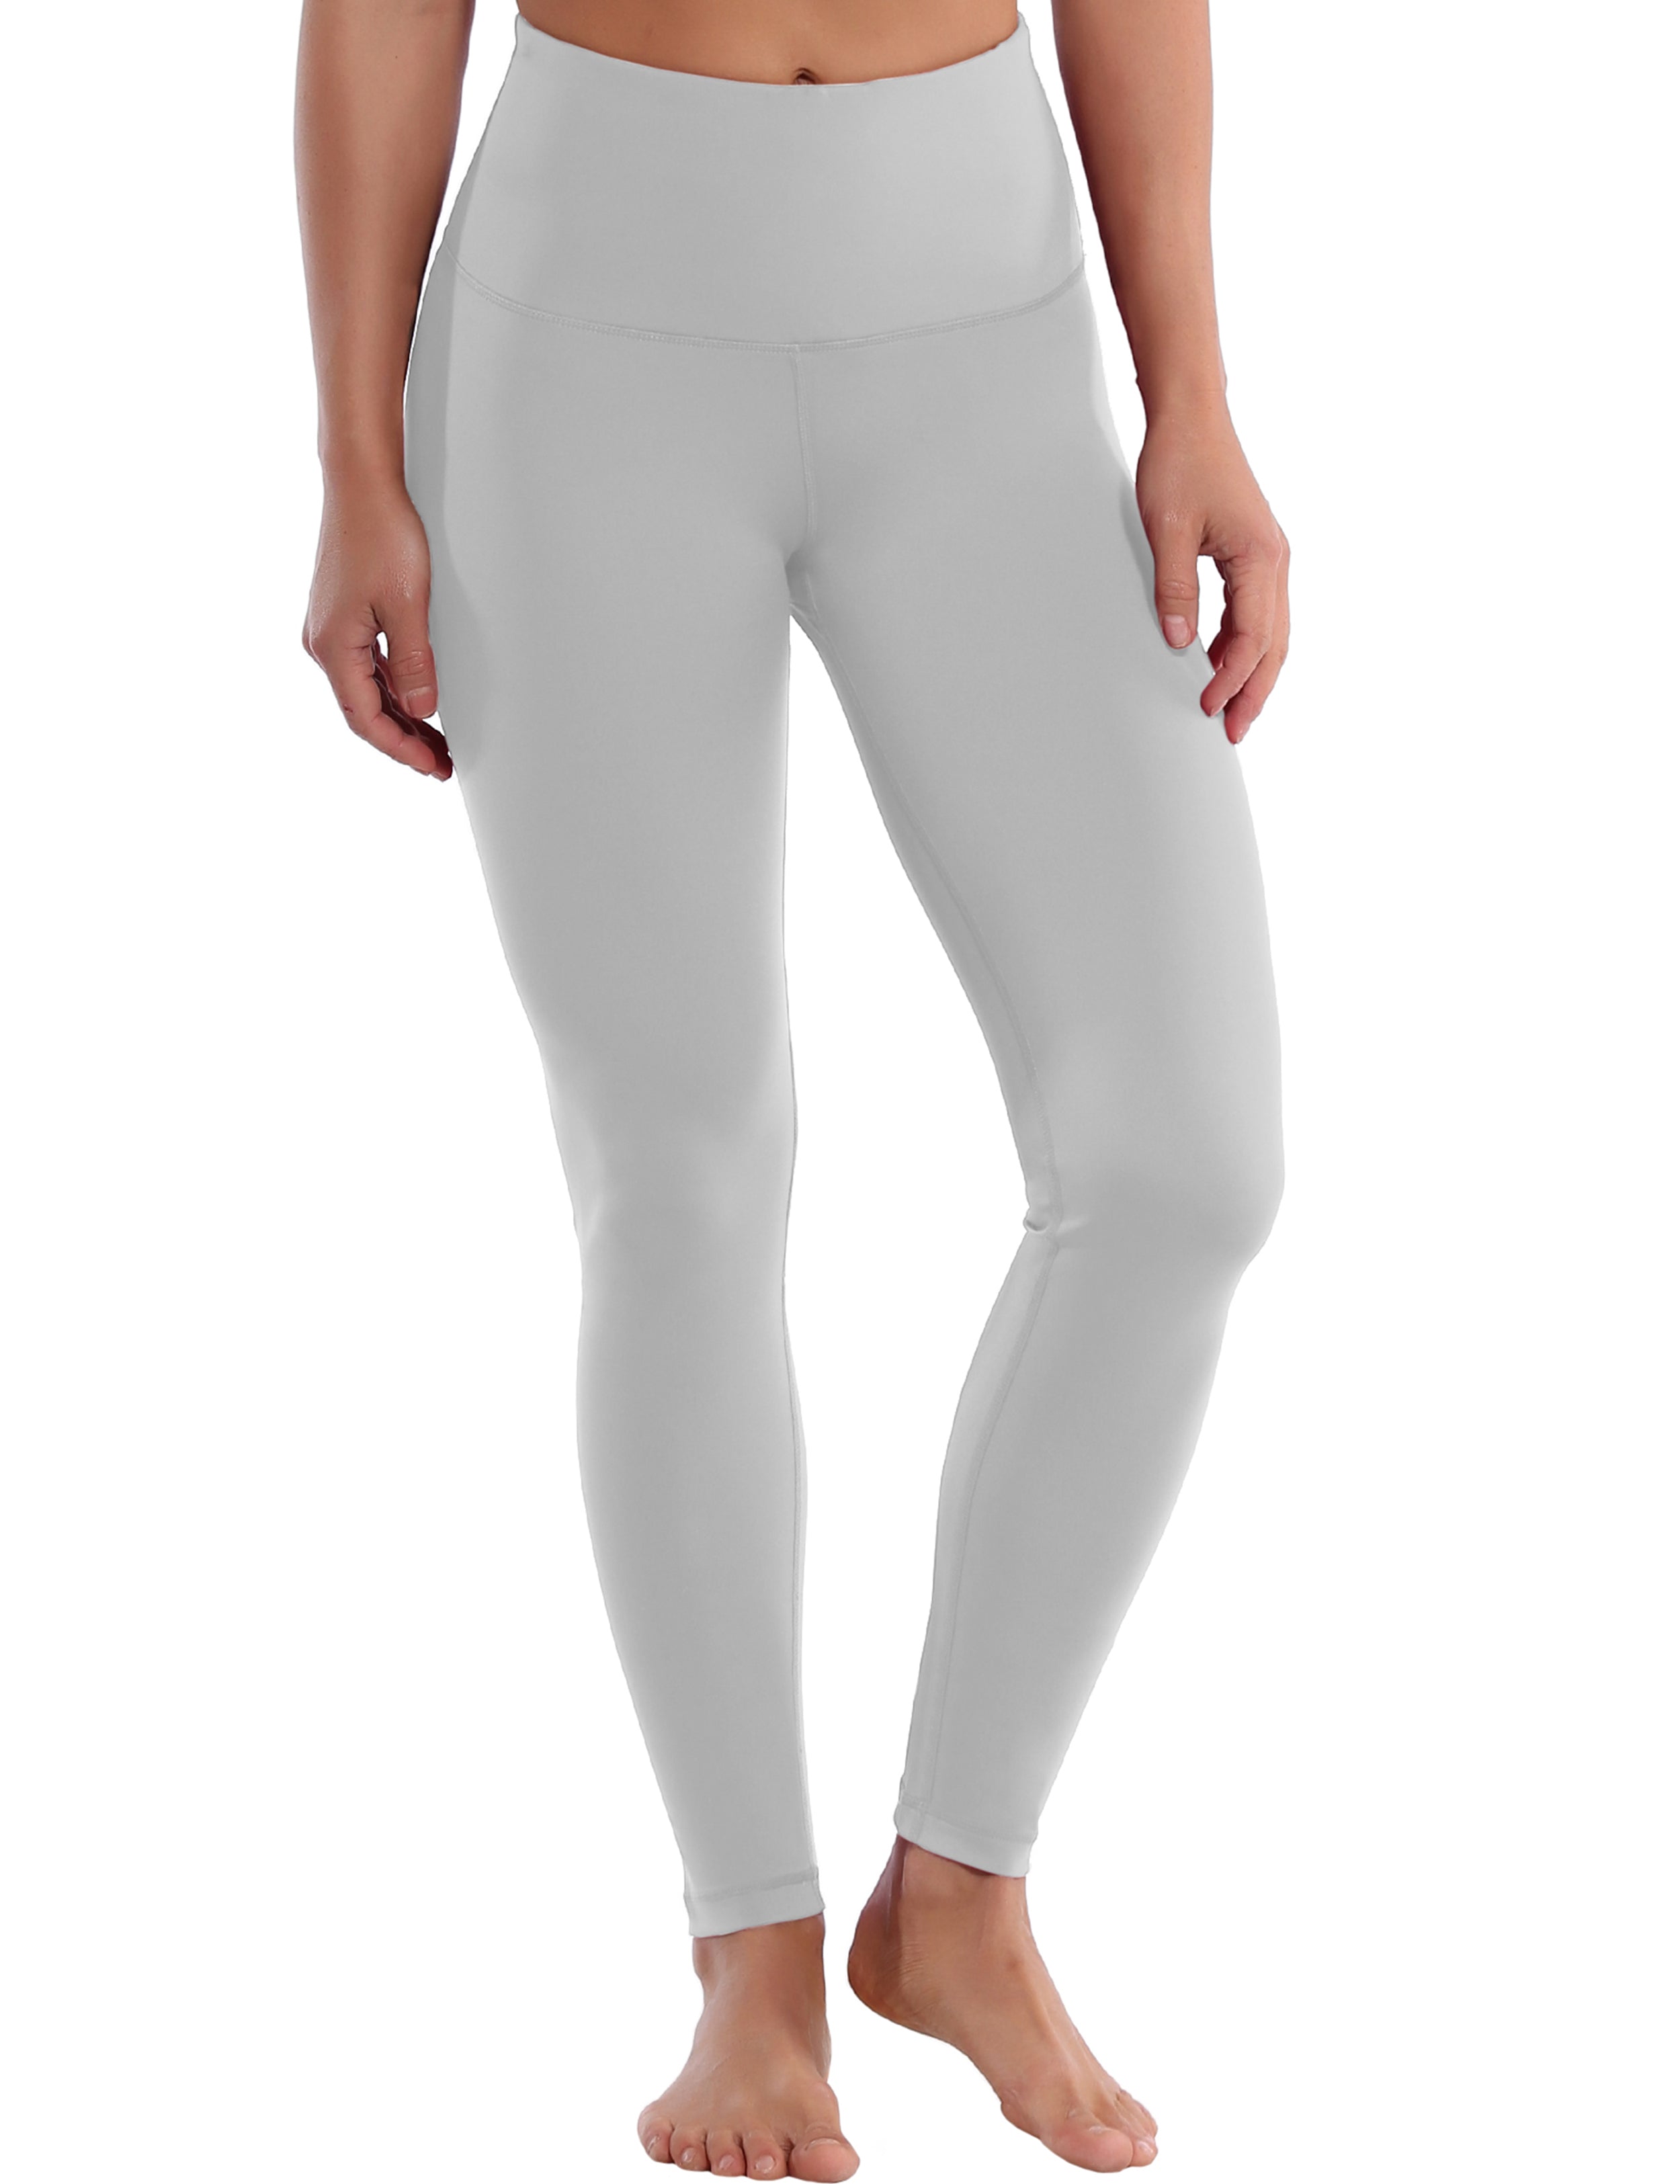 High Waist yogastudio Pants lightgray 75%Nylon/25%Spandex Fabric doesn't attract lint easily 4-way stretch No see-through Moisture-wicking Tummy control Inner pocket Four lengths